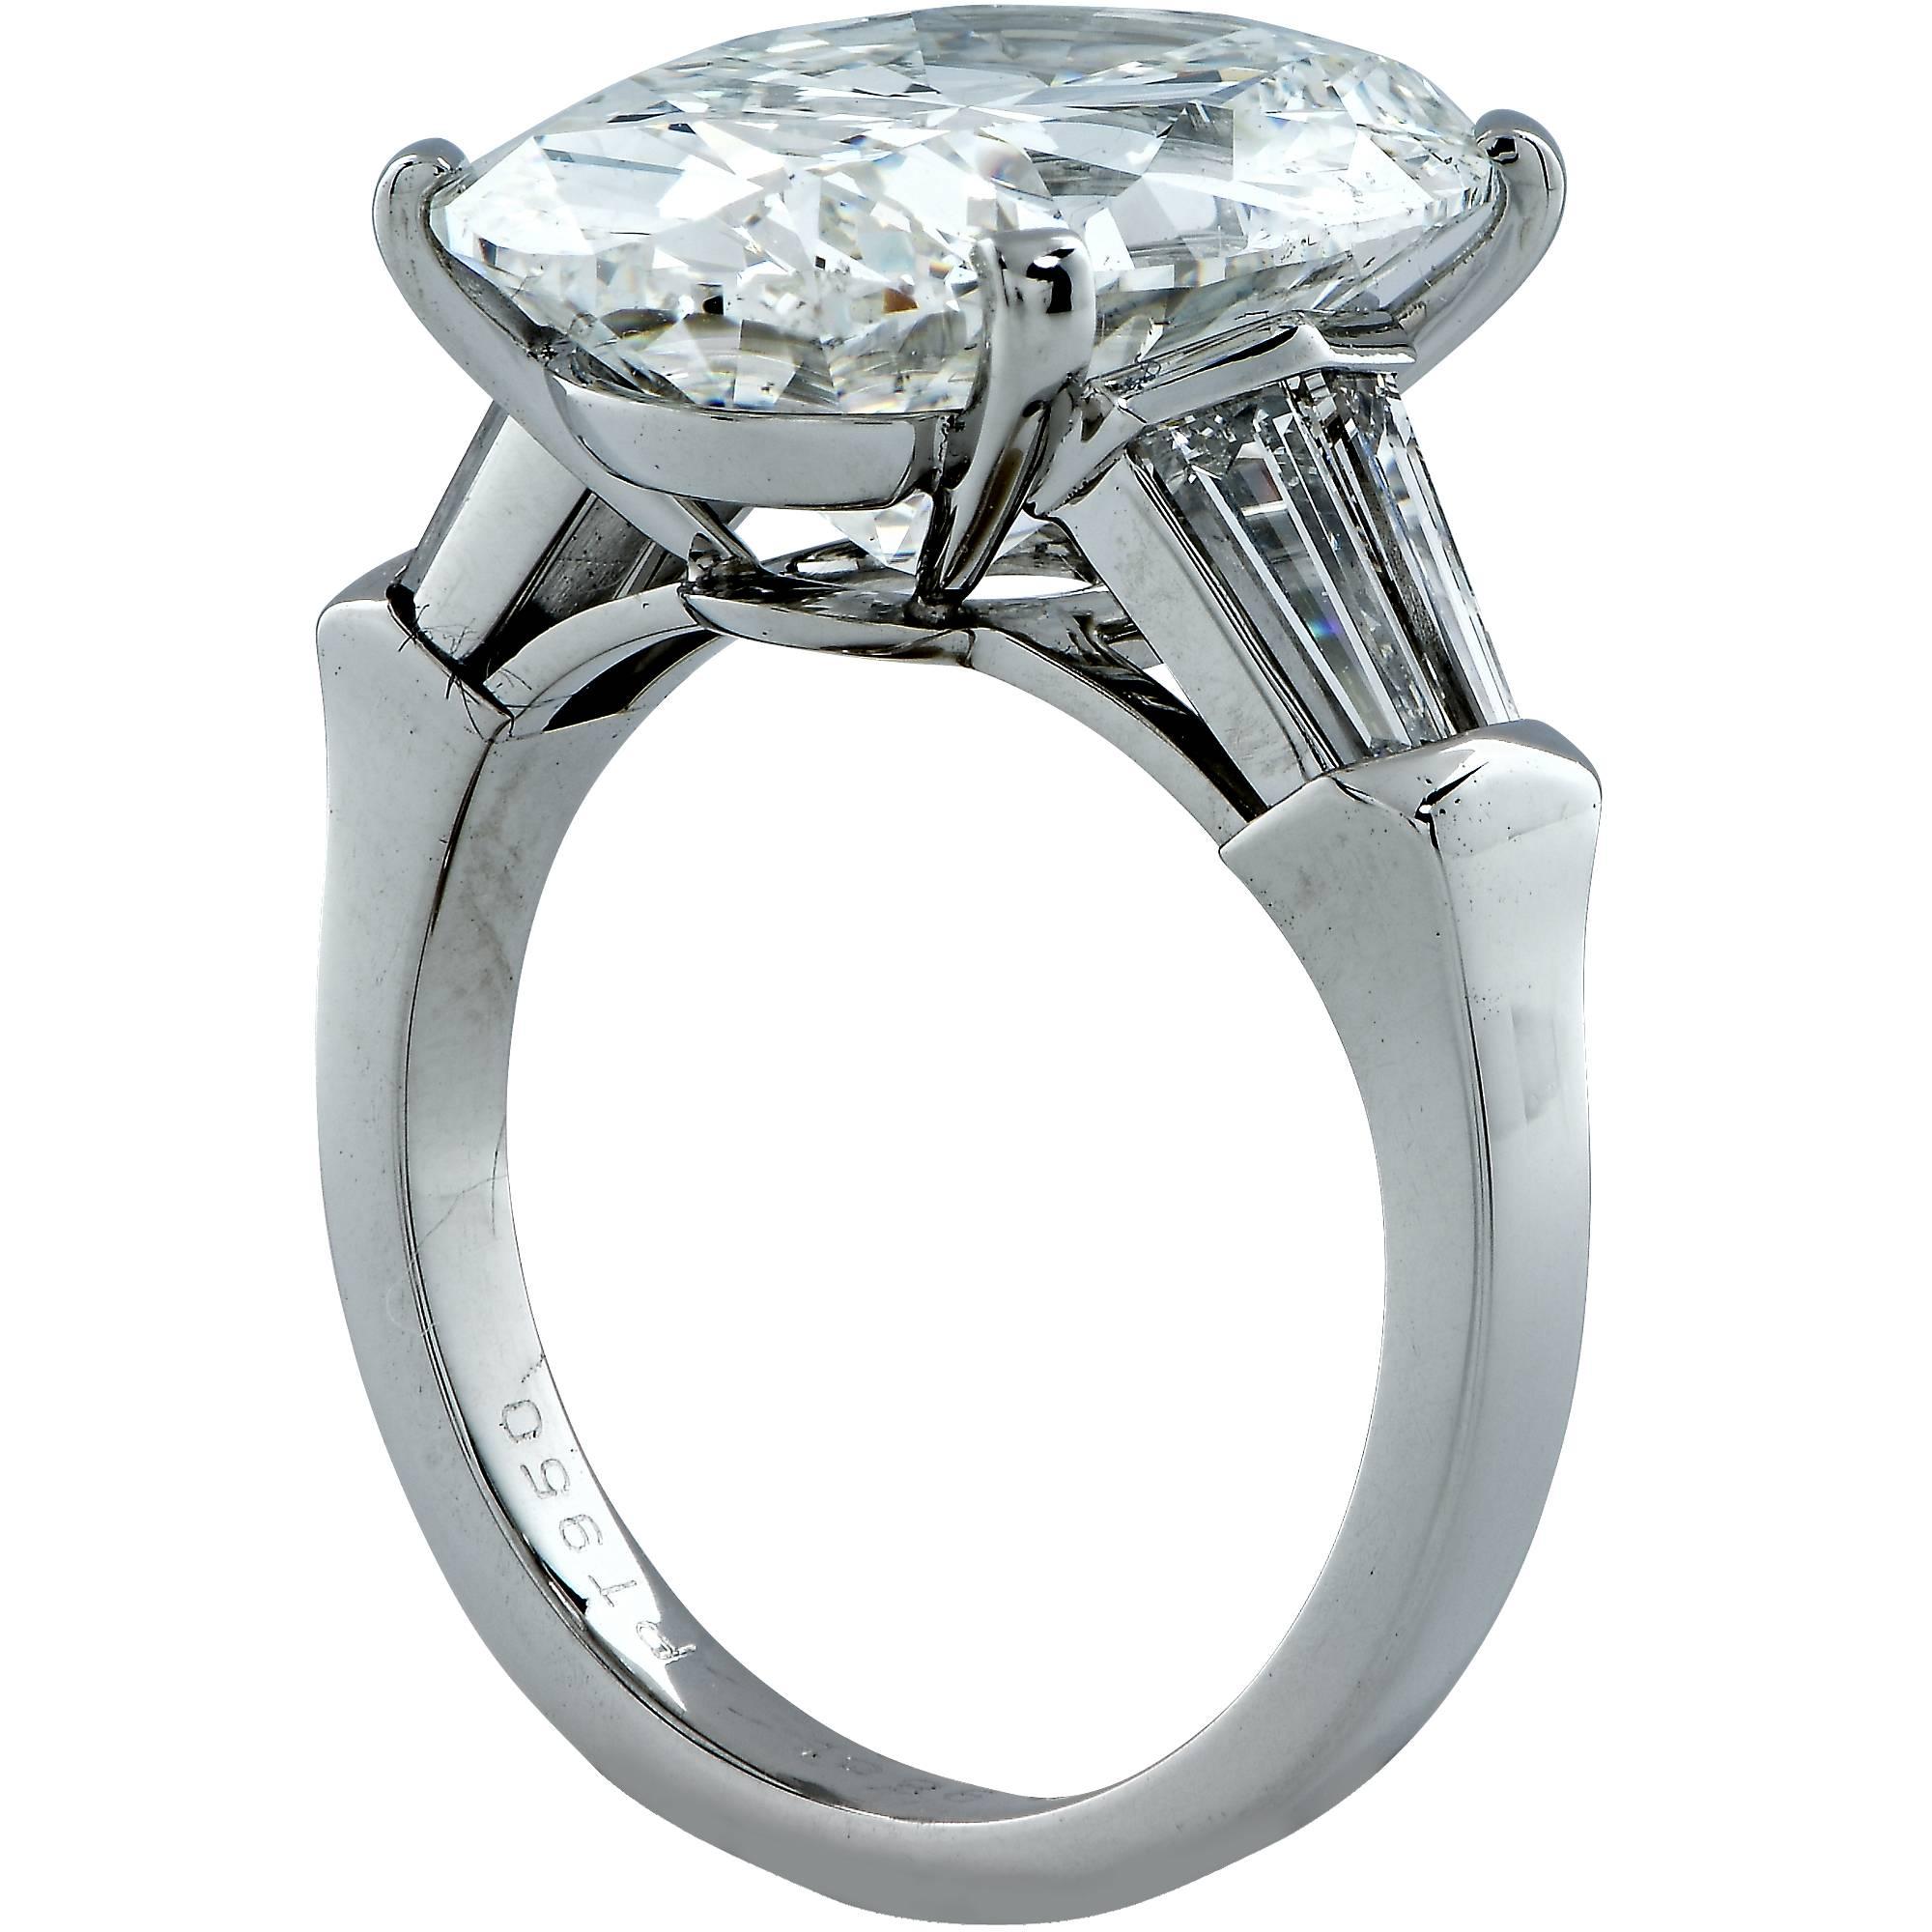 This beautifully designed platinum custom made engagement ring will surely yield a smile. It highlights a GIA graded 9.48ct oval cut diamond I color and SI1 clarity and is flanked by 4 tapered baguettes weighing approximately 1.20ct total H color